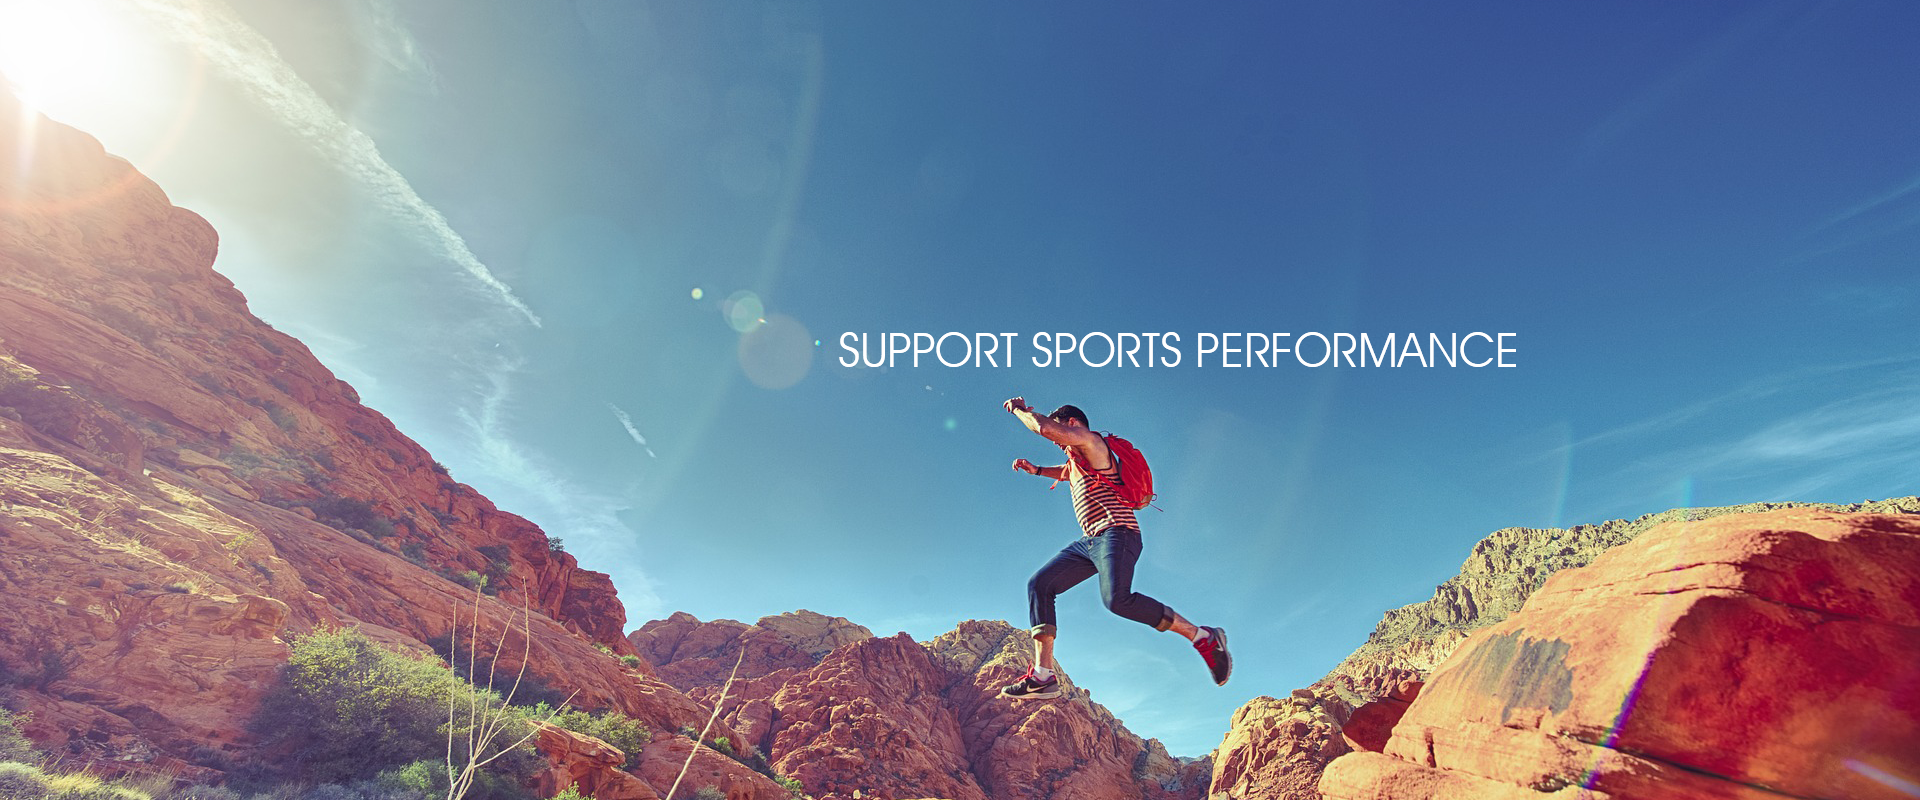 Inmed support sports performance